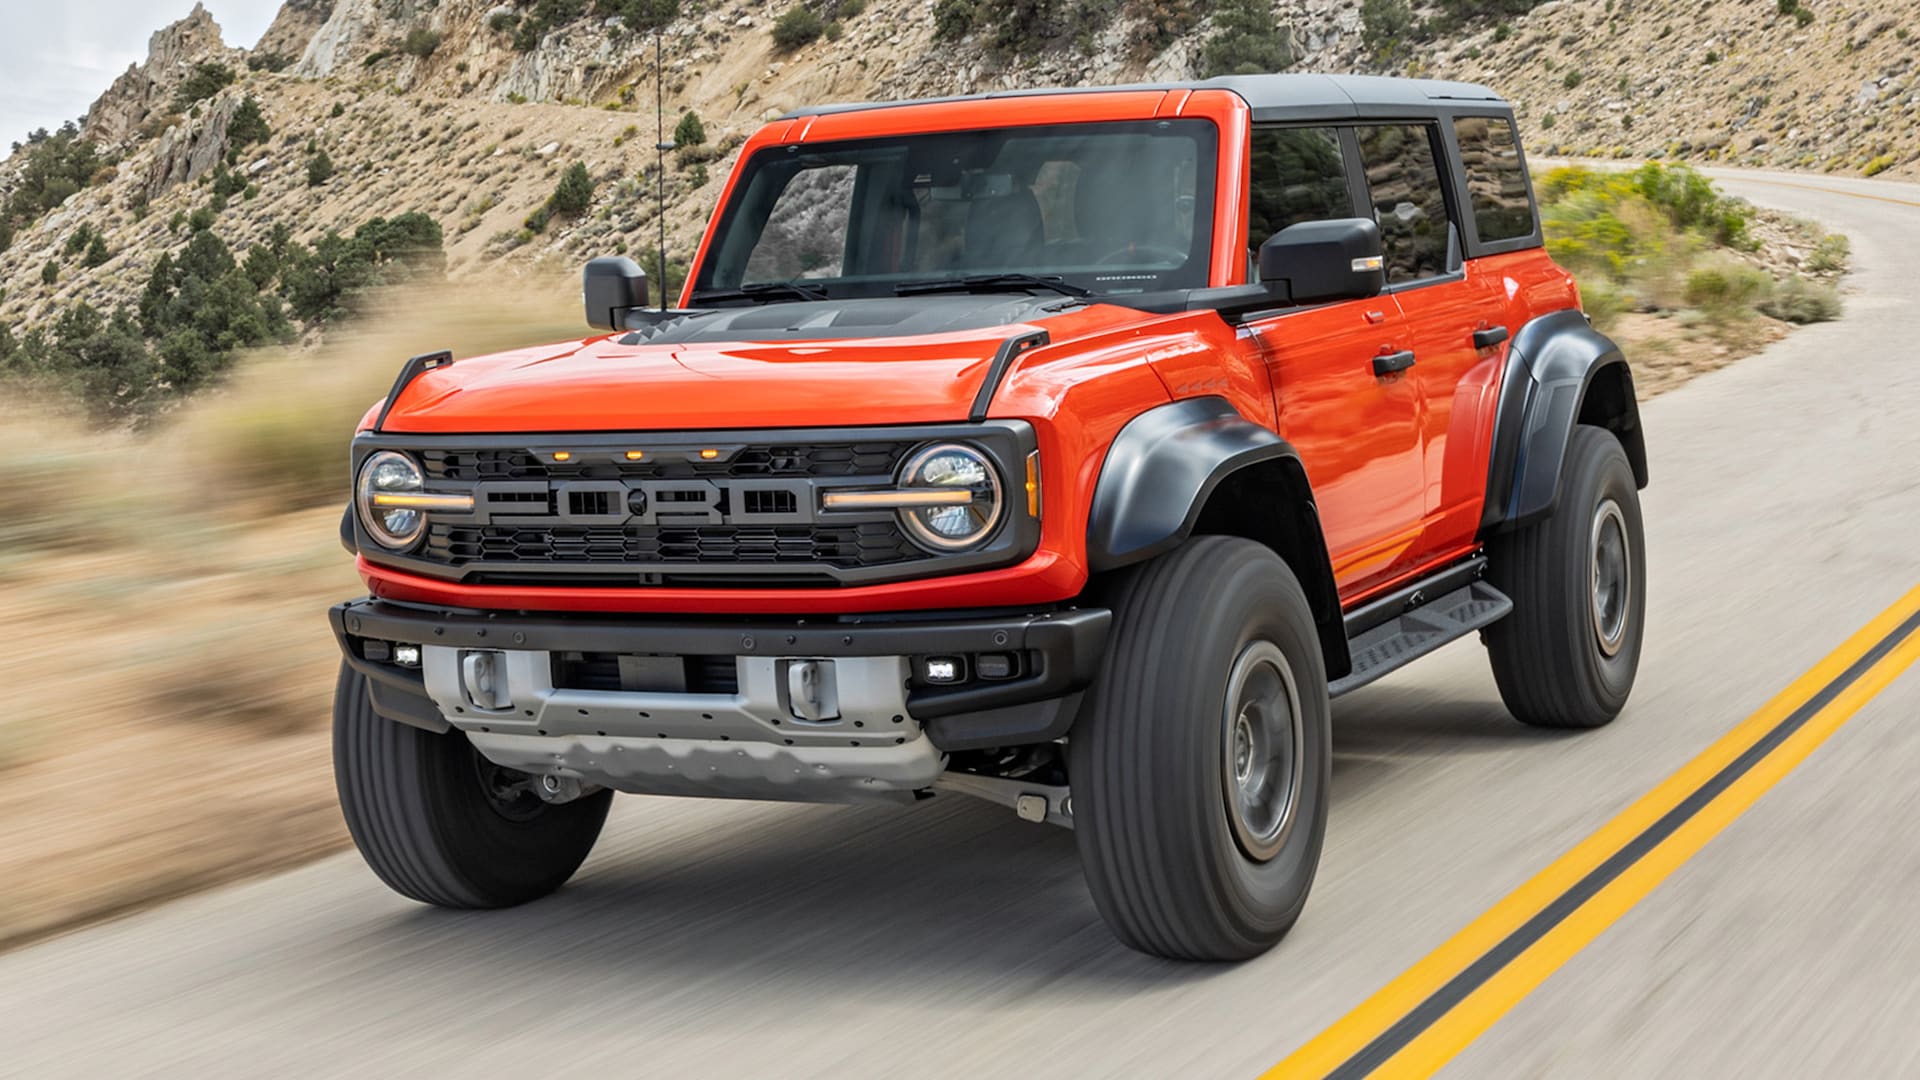 More Ford Bronco Trims Will Grow the Herd